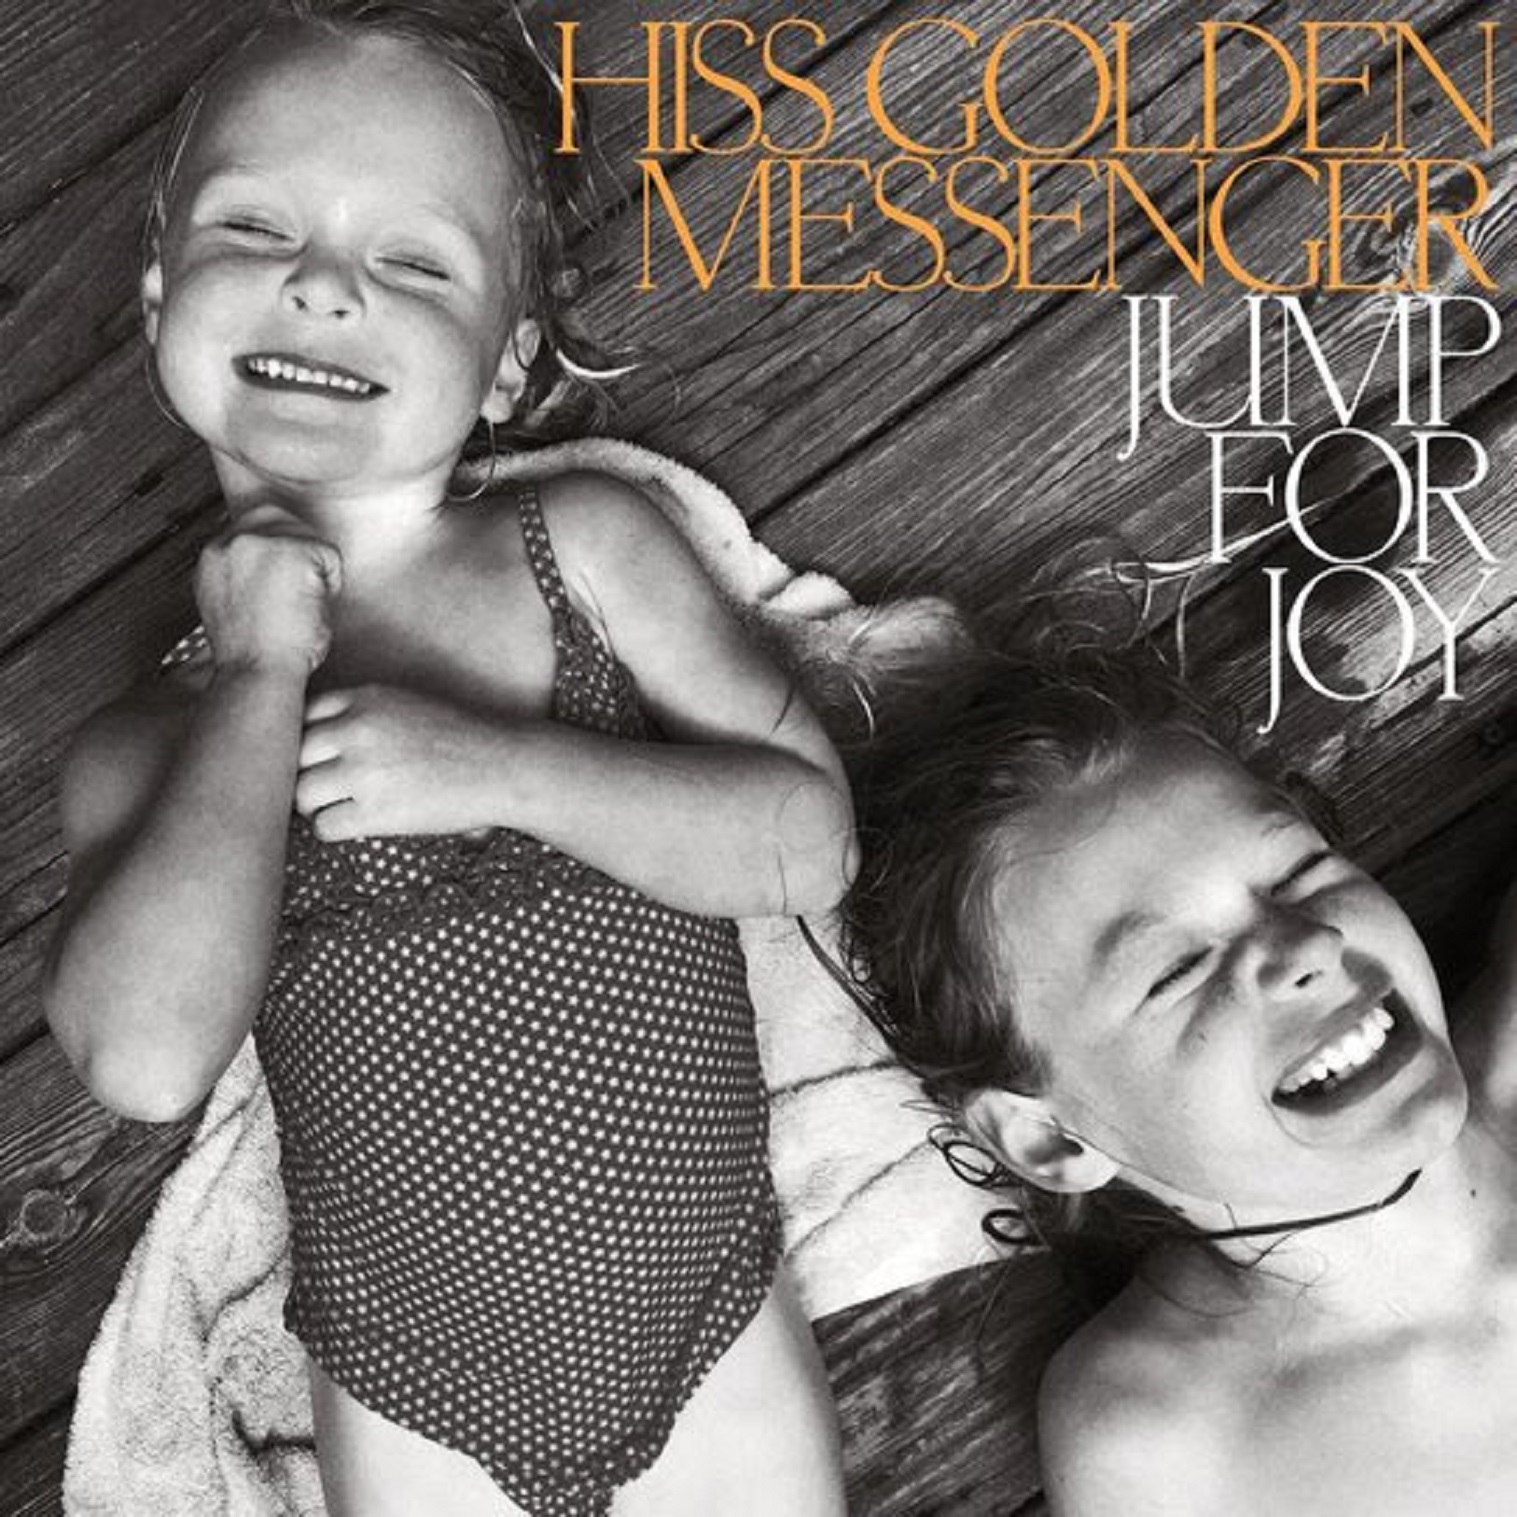 Hiss Golden Messenger Releases New Track “20 Years And A Nickel” Ahead Of JUMP FOR JOY – Out August 25th